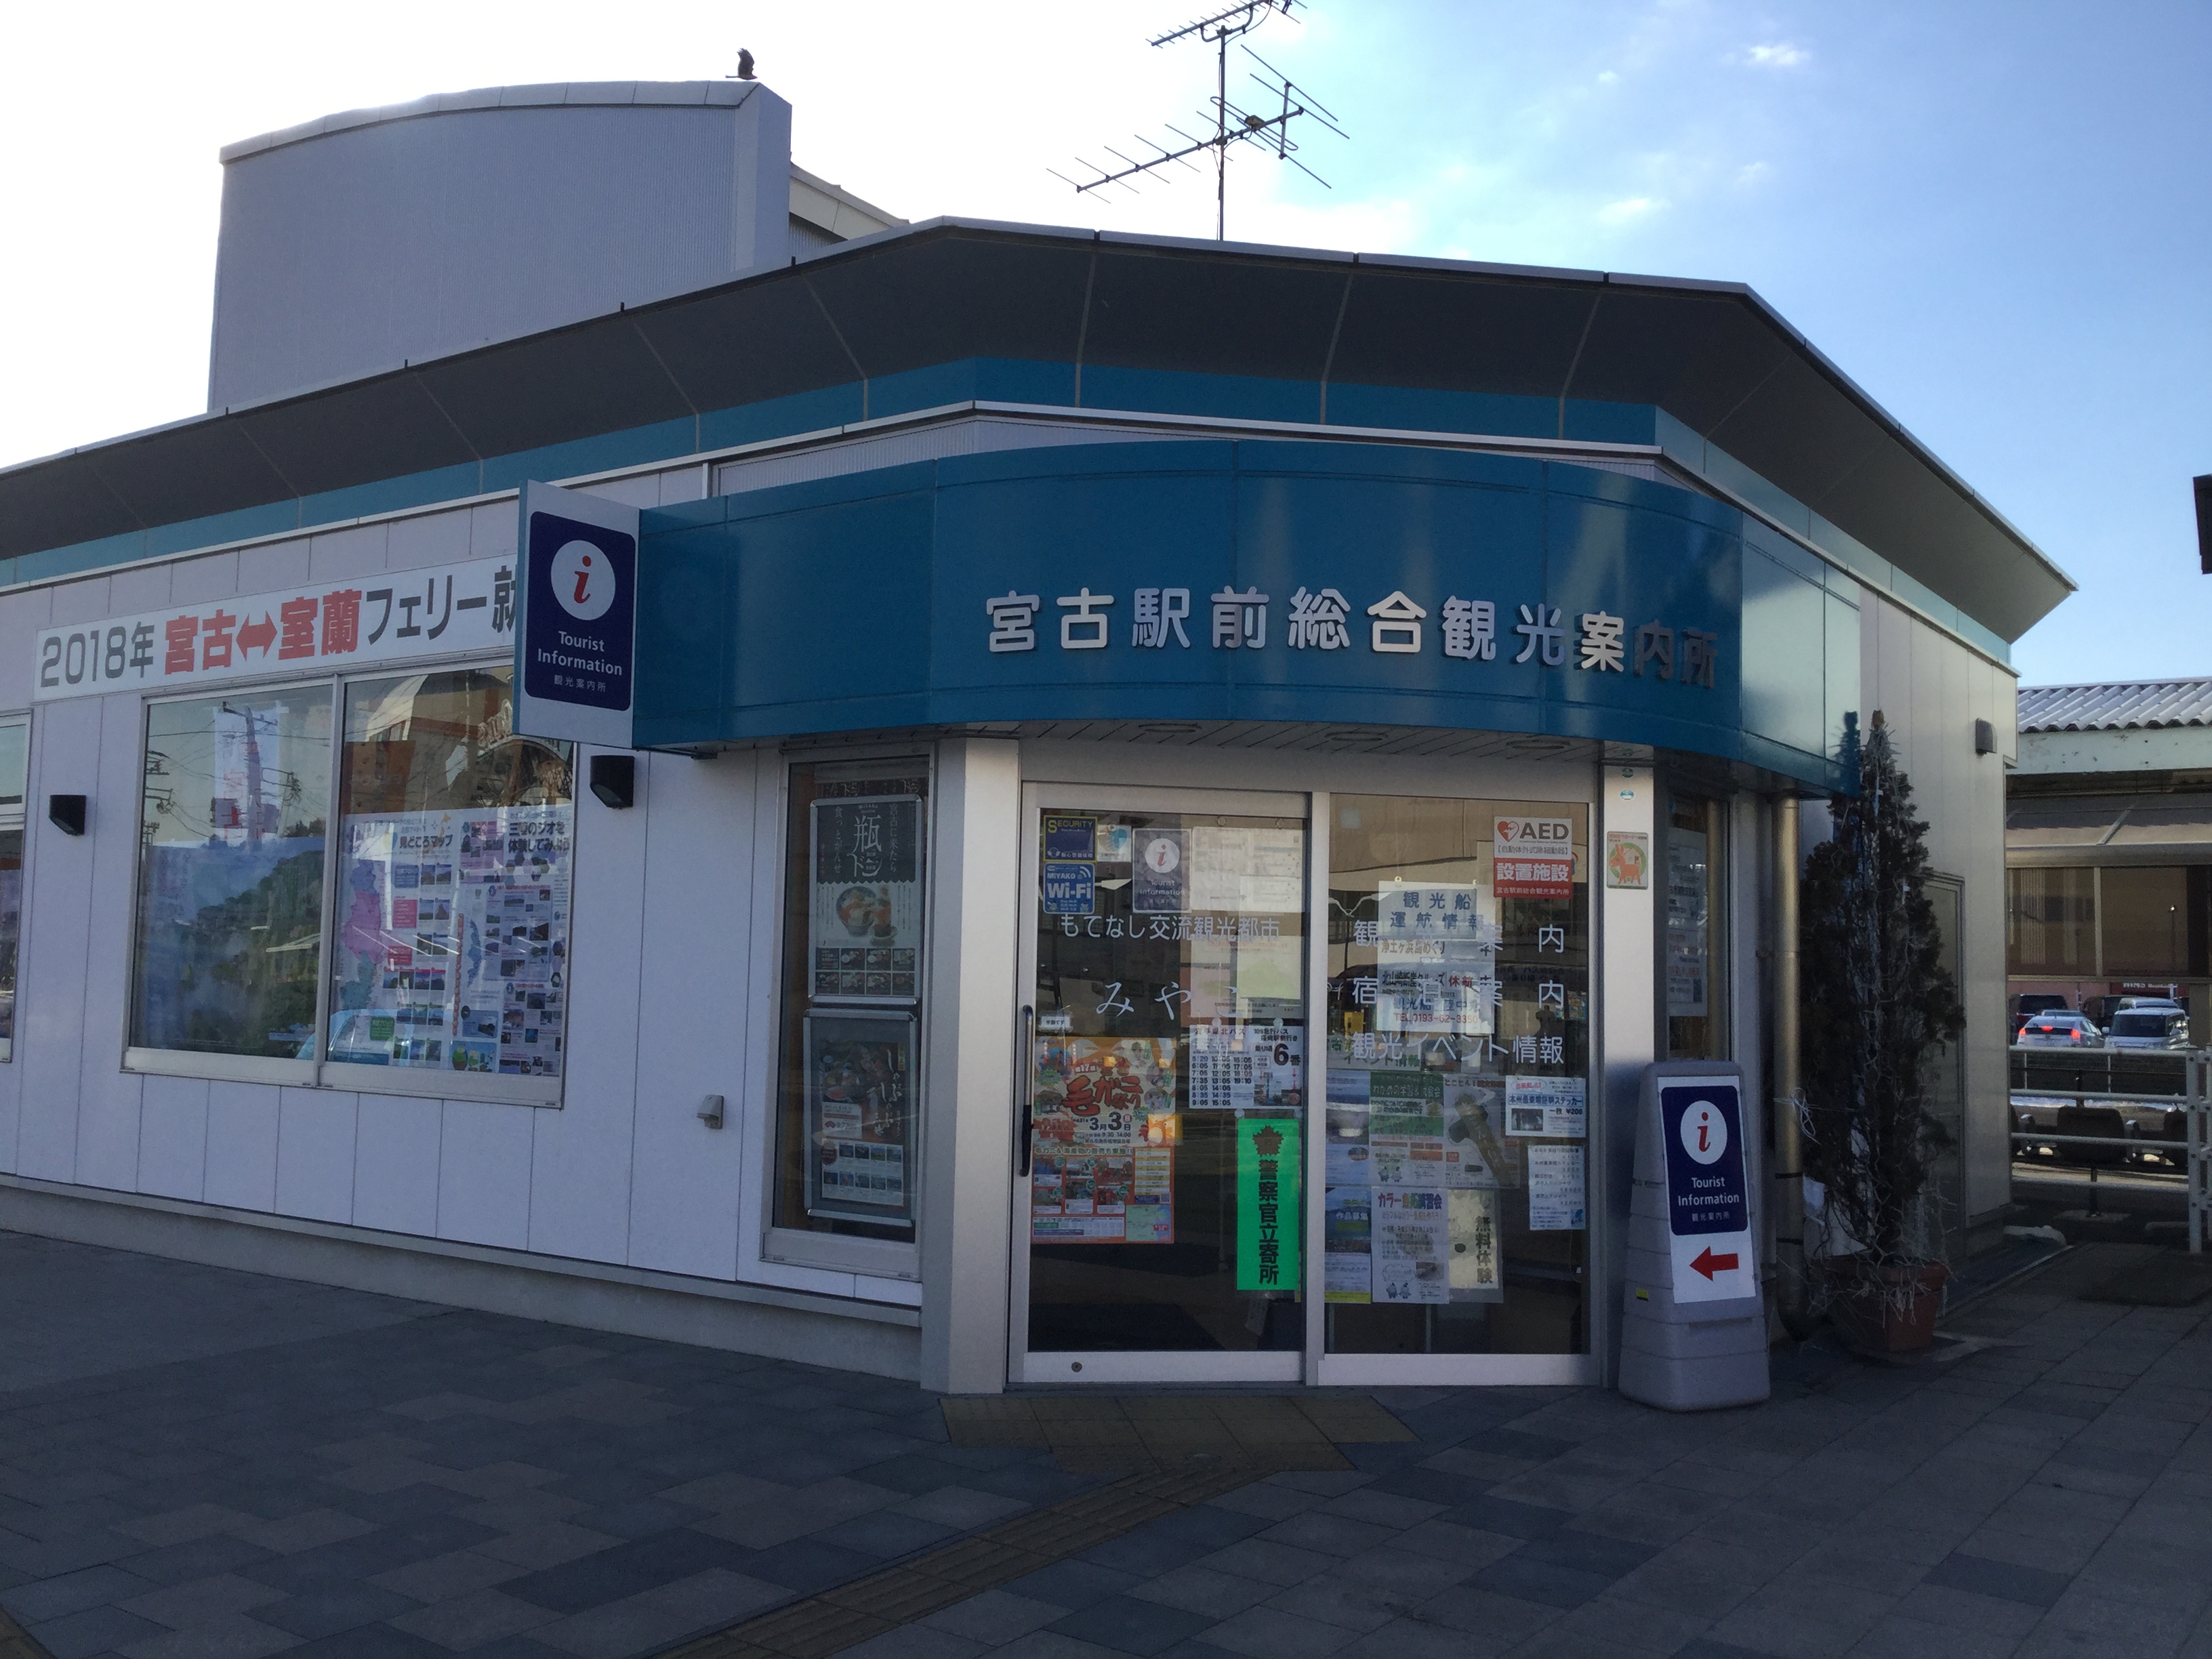 Tourist Information Centers in Japan